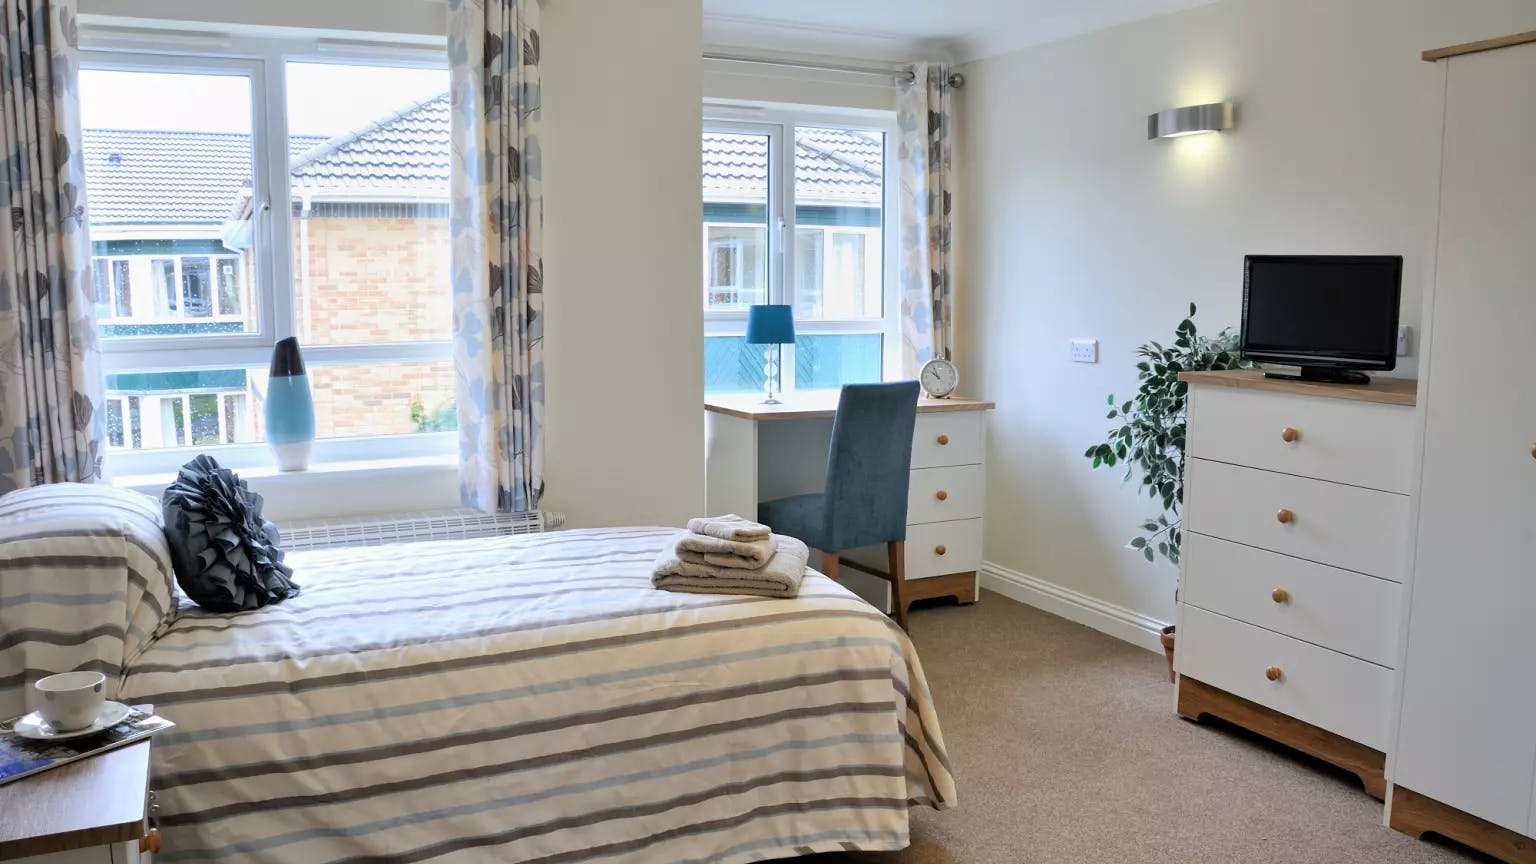 Bedroom of Willow Court care home in Harpenden, Hertfordshire